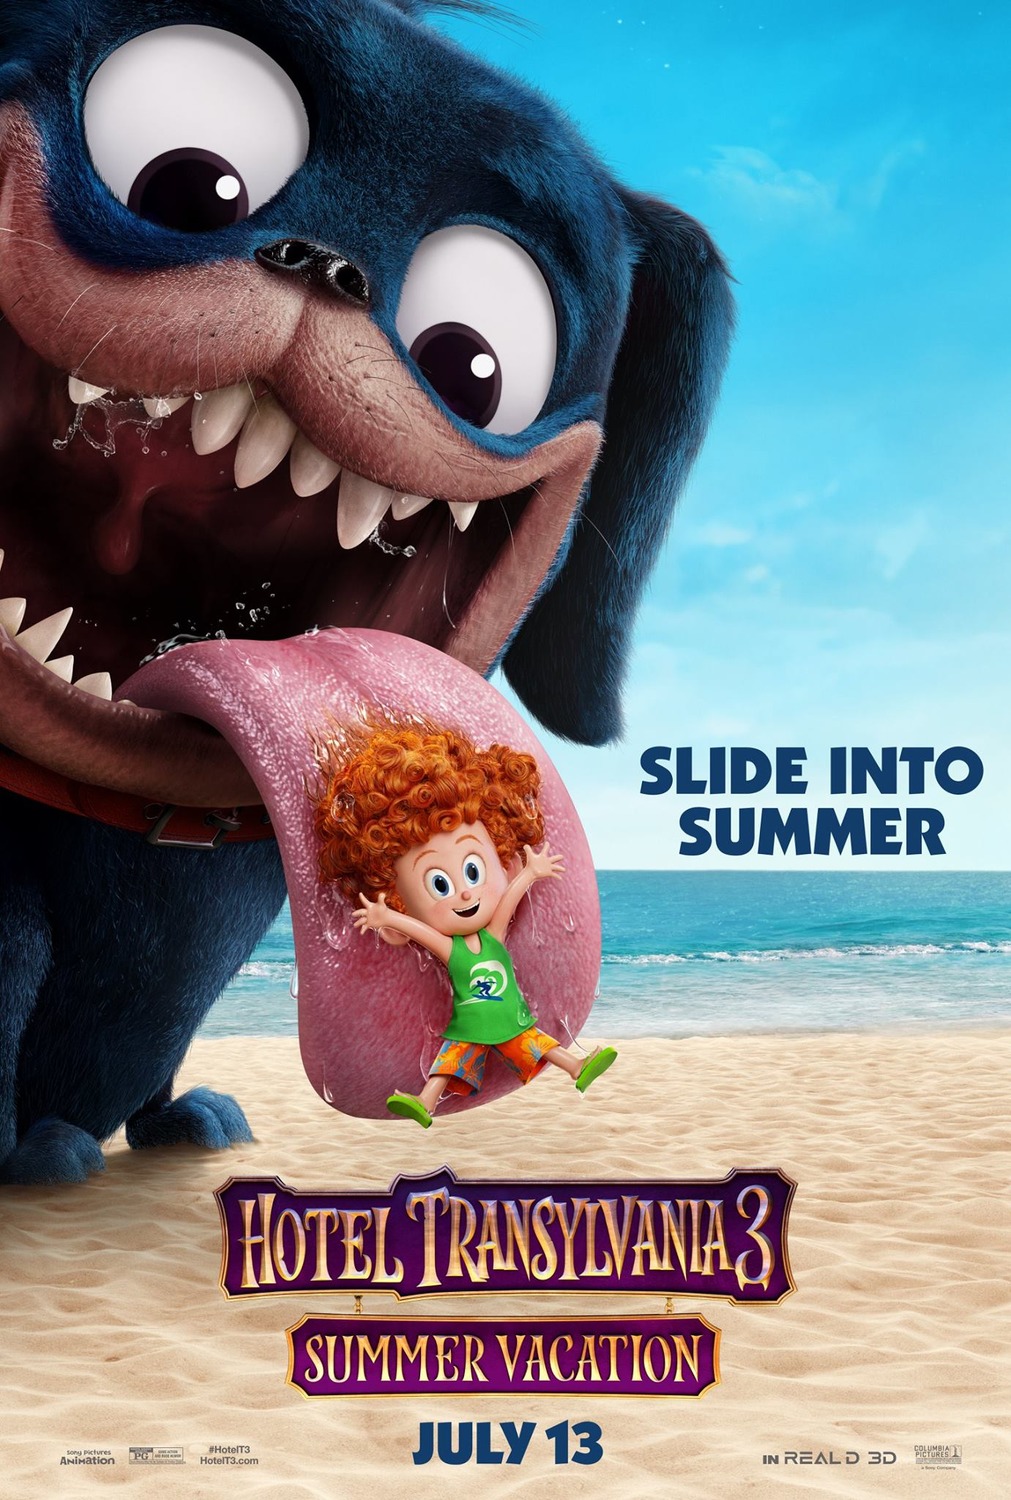 Extra Large Movie Poster Image for Hotel Transylvania 3: Summer Vacation (#17 of 17)